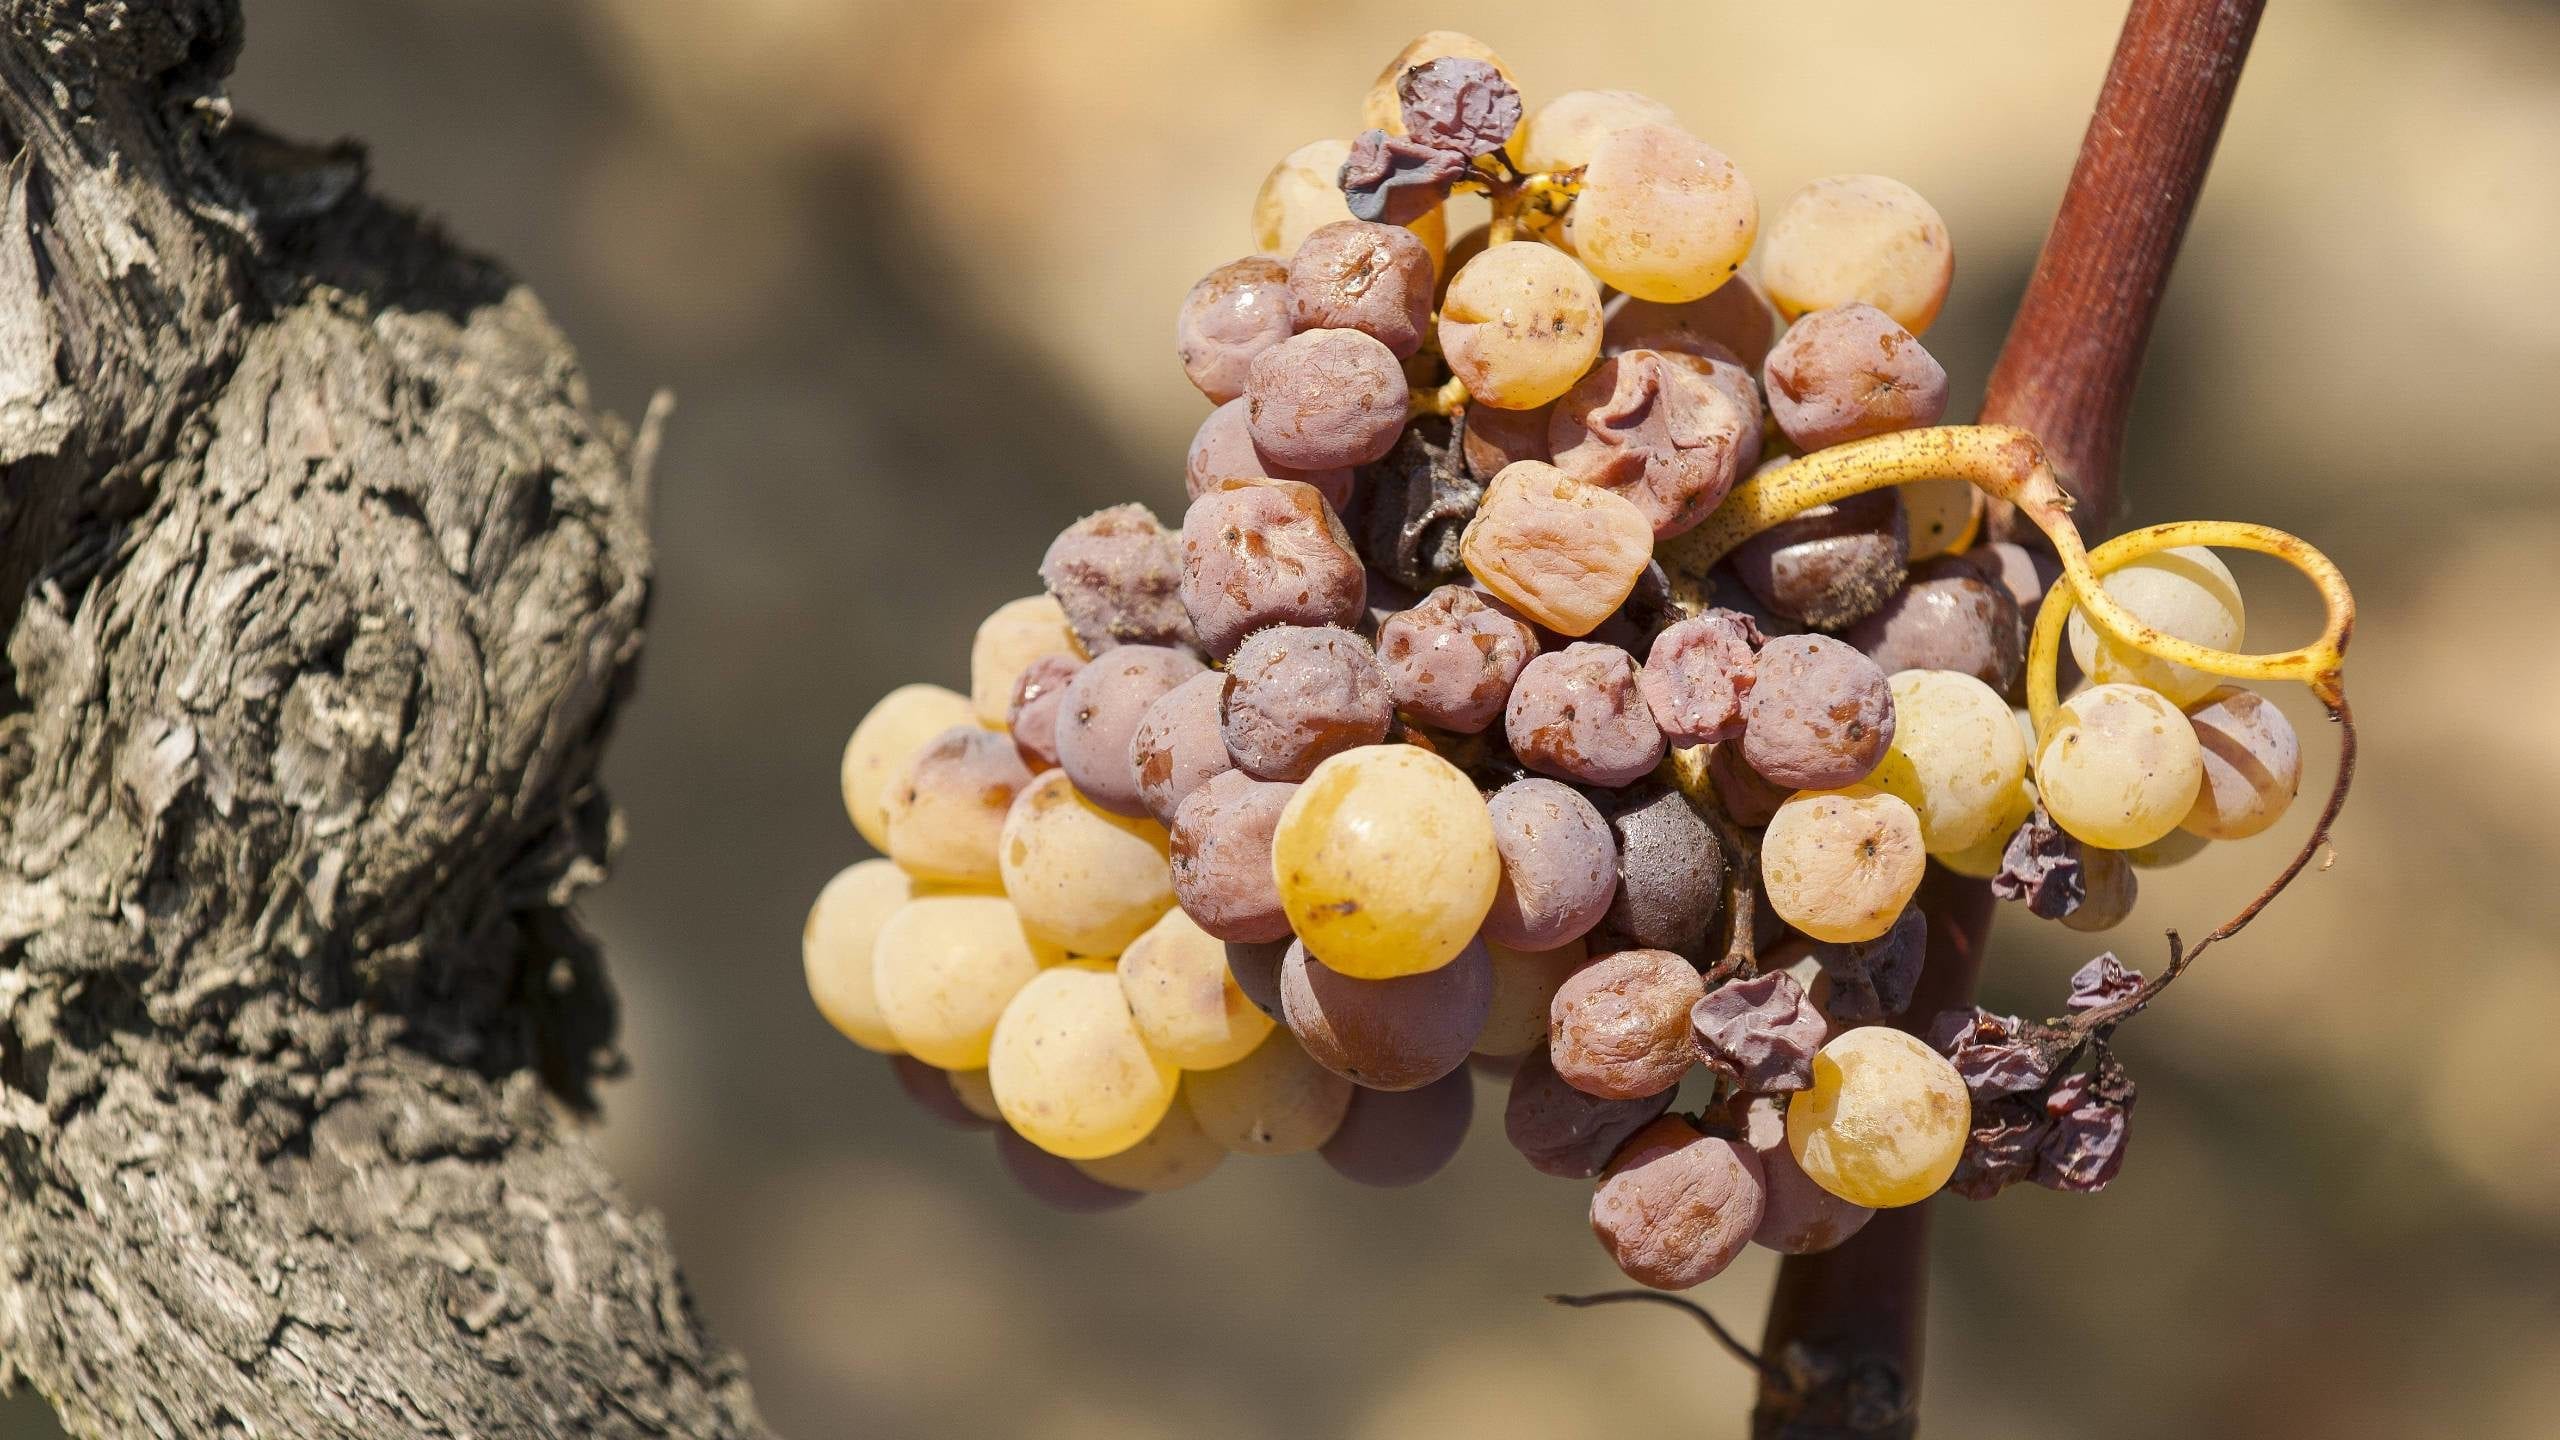 Grapes affected by noble rot in Sauternes, France